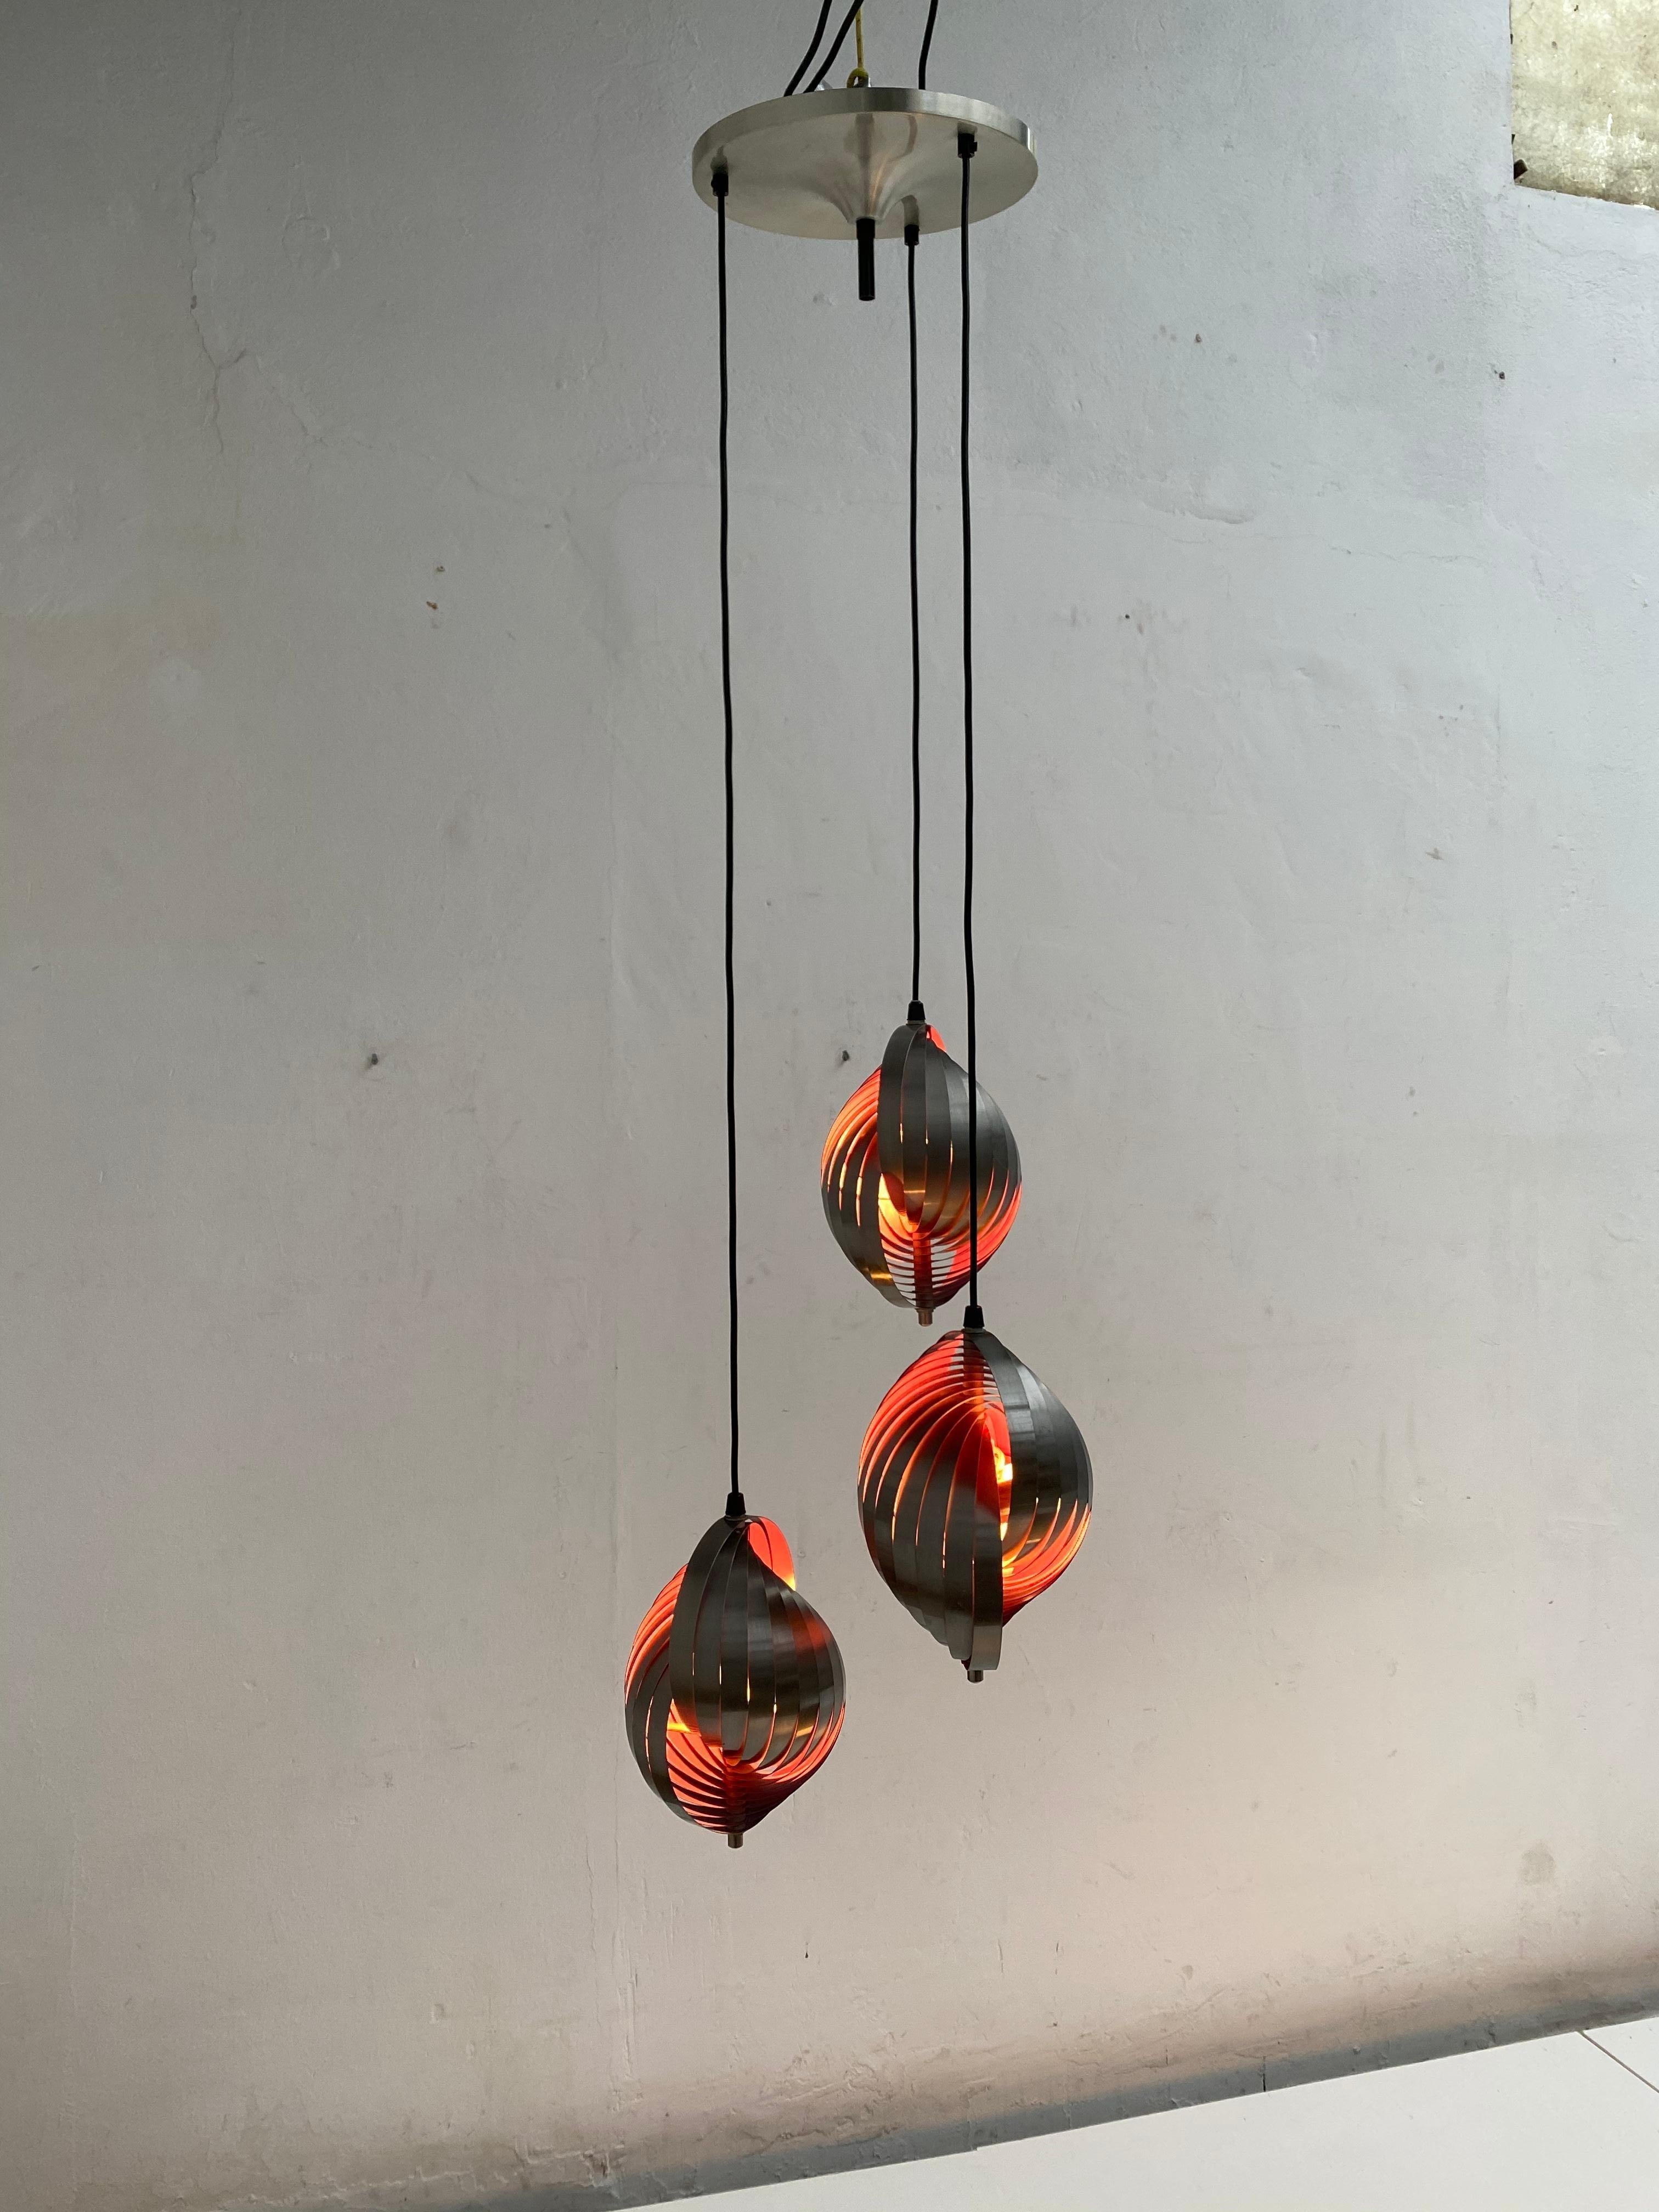 Ceiling fixture by French designer Henri Mathieu for Lyfa, Denmark, circa 1970

3 brushed stainless steel pendants with purple enameled interior that give this fixture a fabulous effect in the dark

Each pendant contains 2 E14 bulb sockets so 6